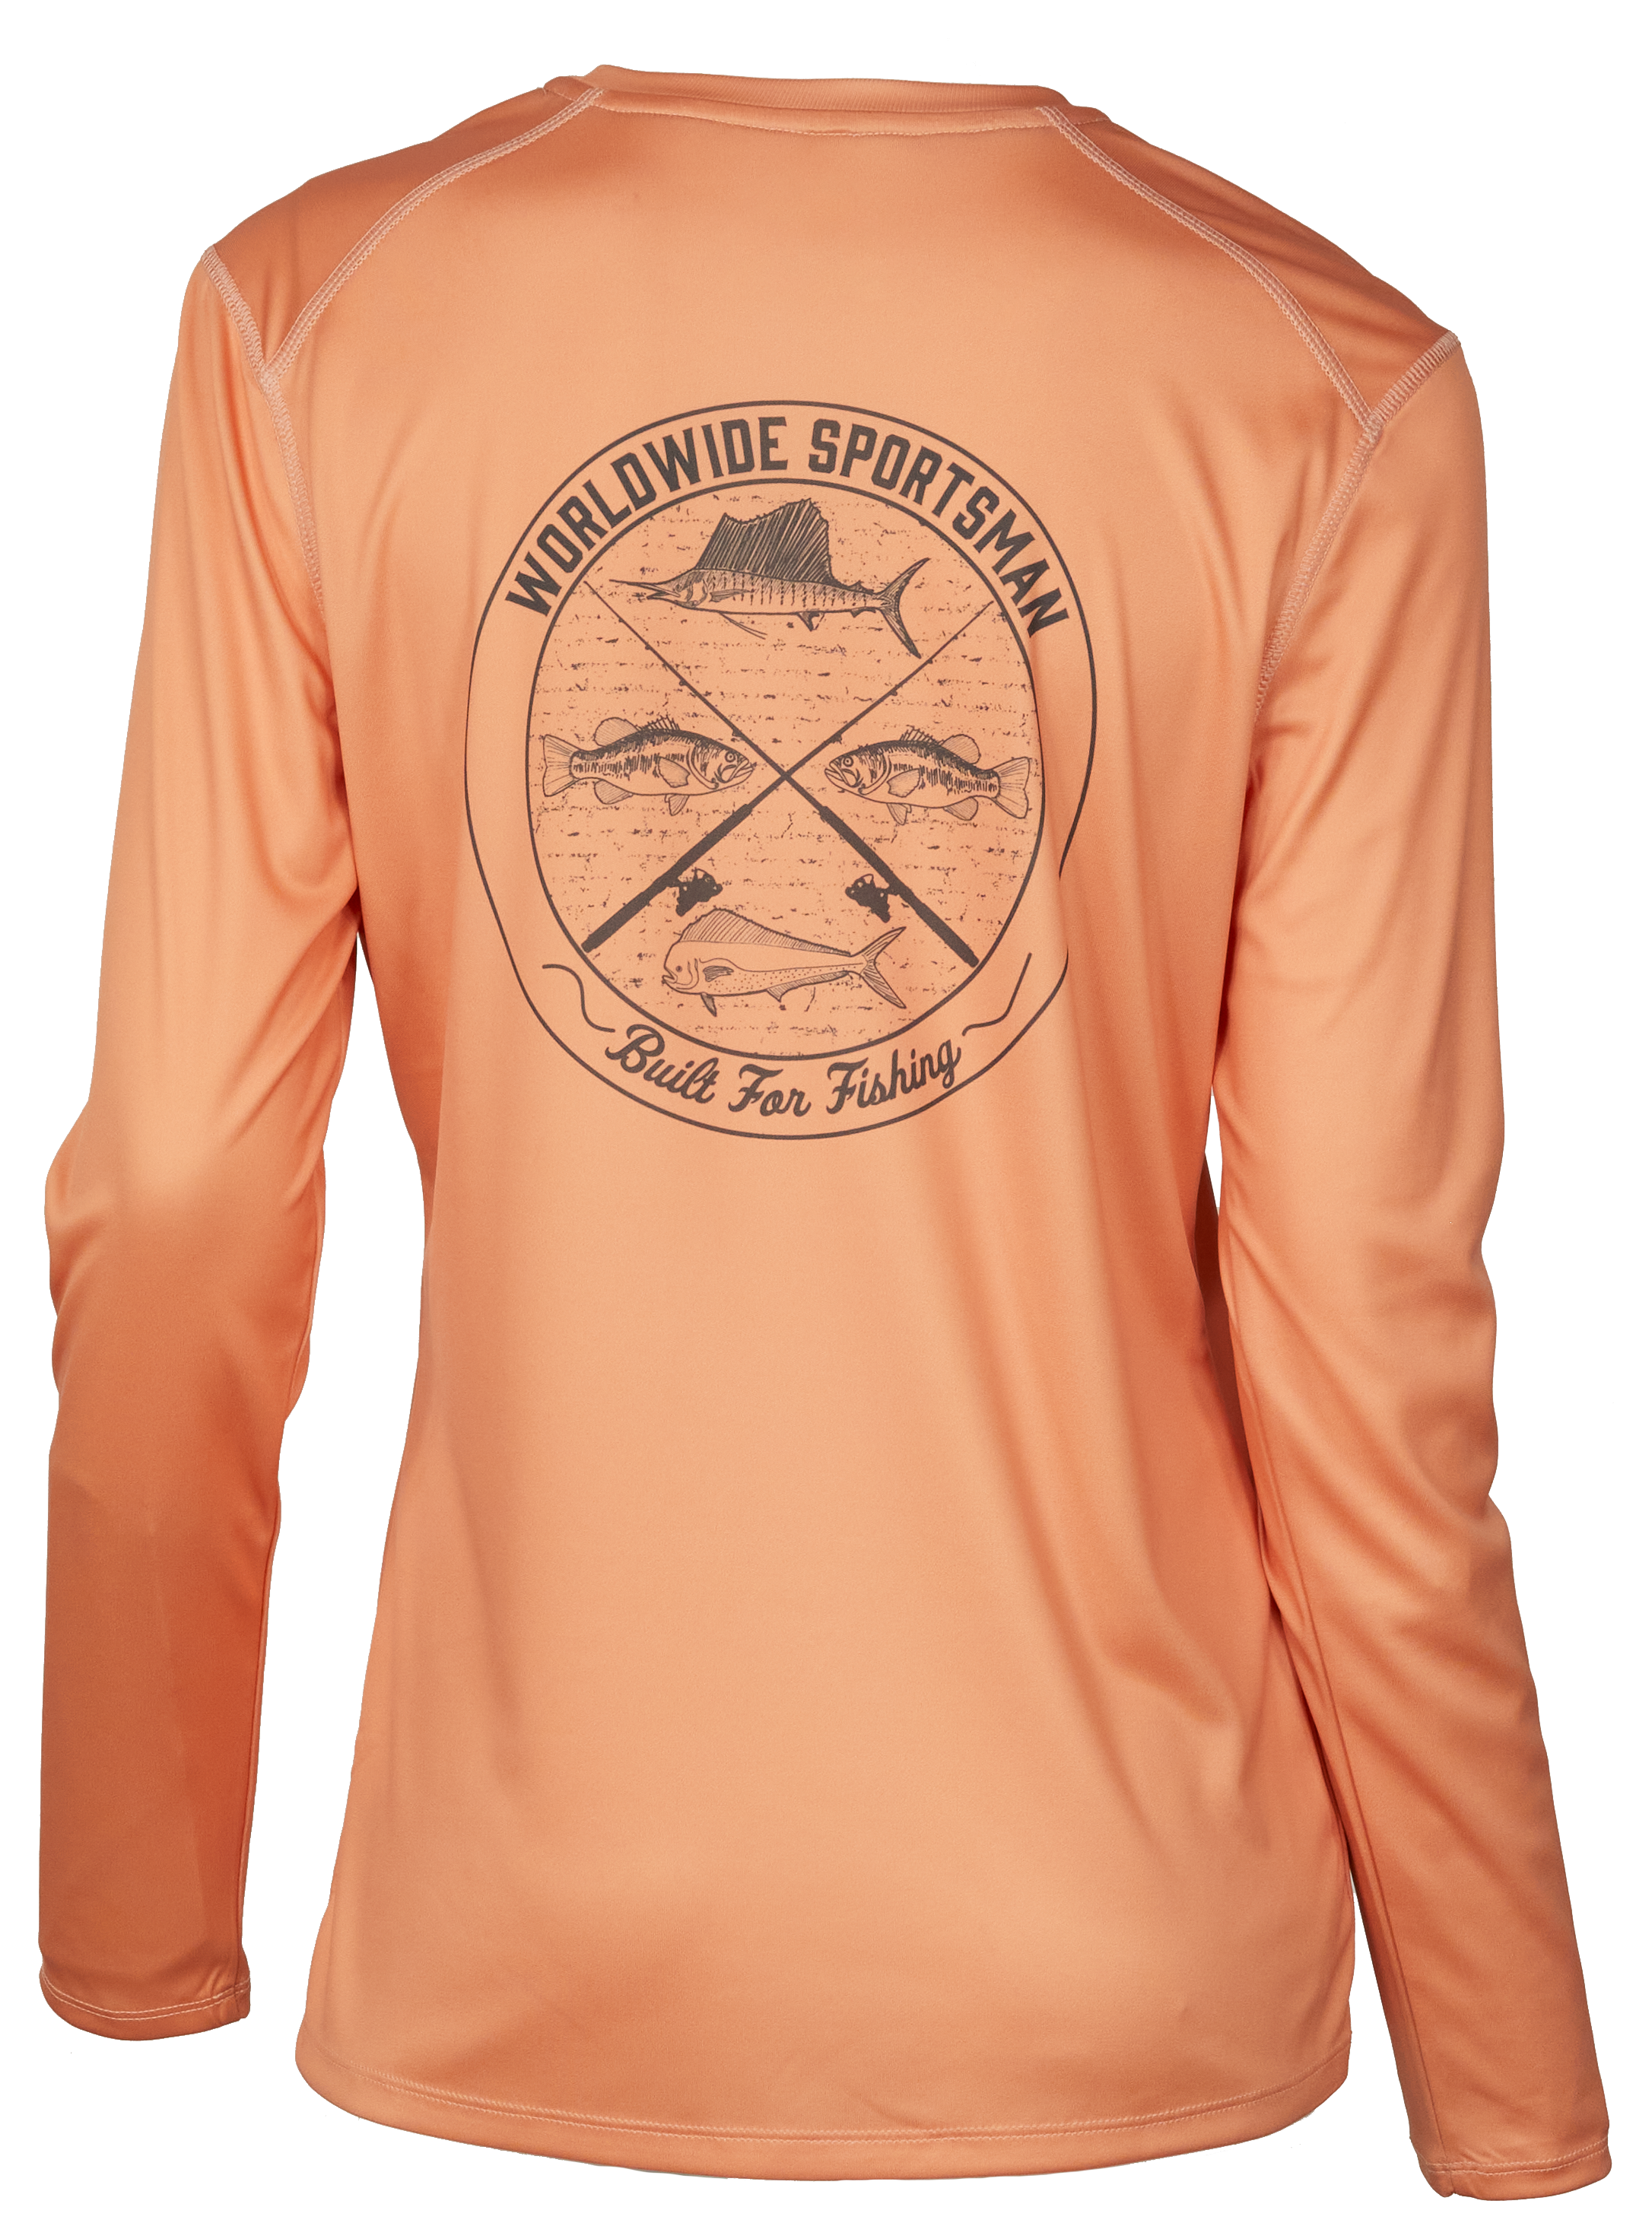 World Wide Sportsman Angler Graphic Long-Sleeve T-Shirt for Ladies